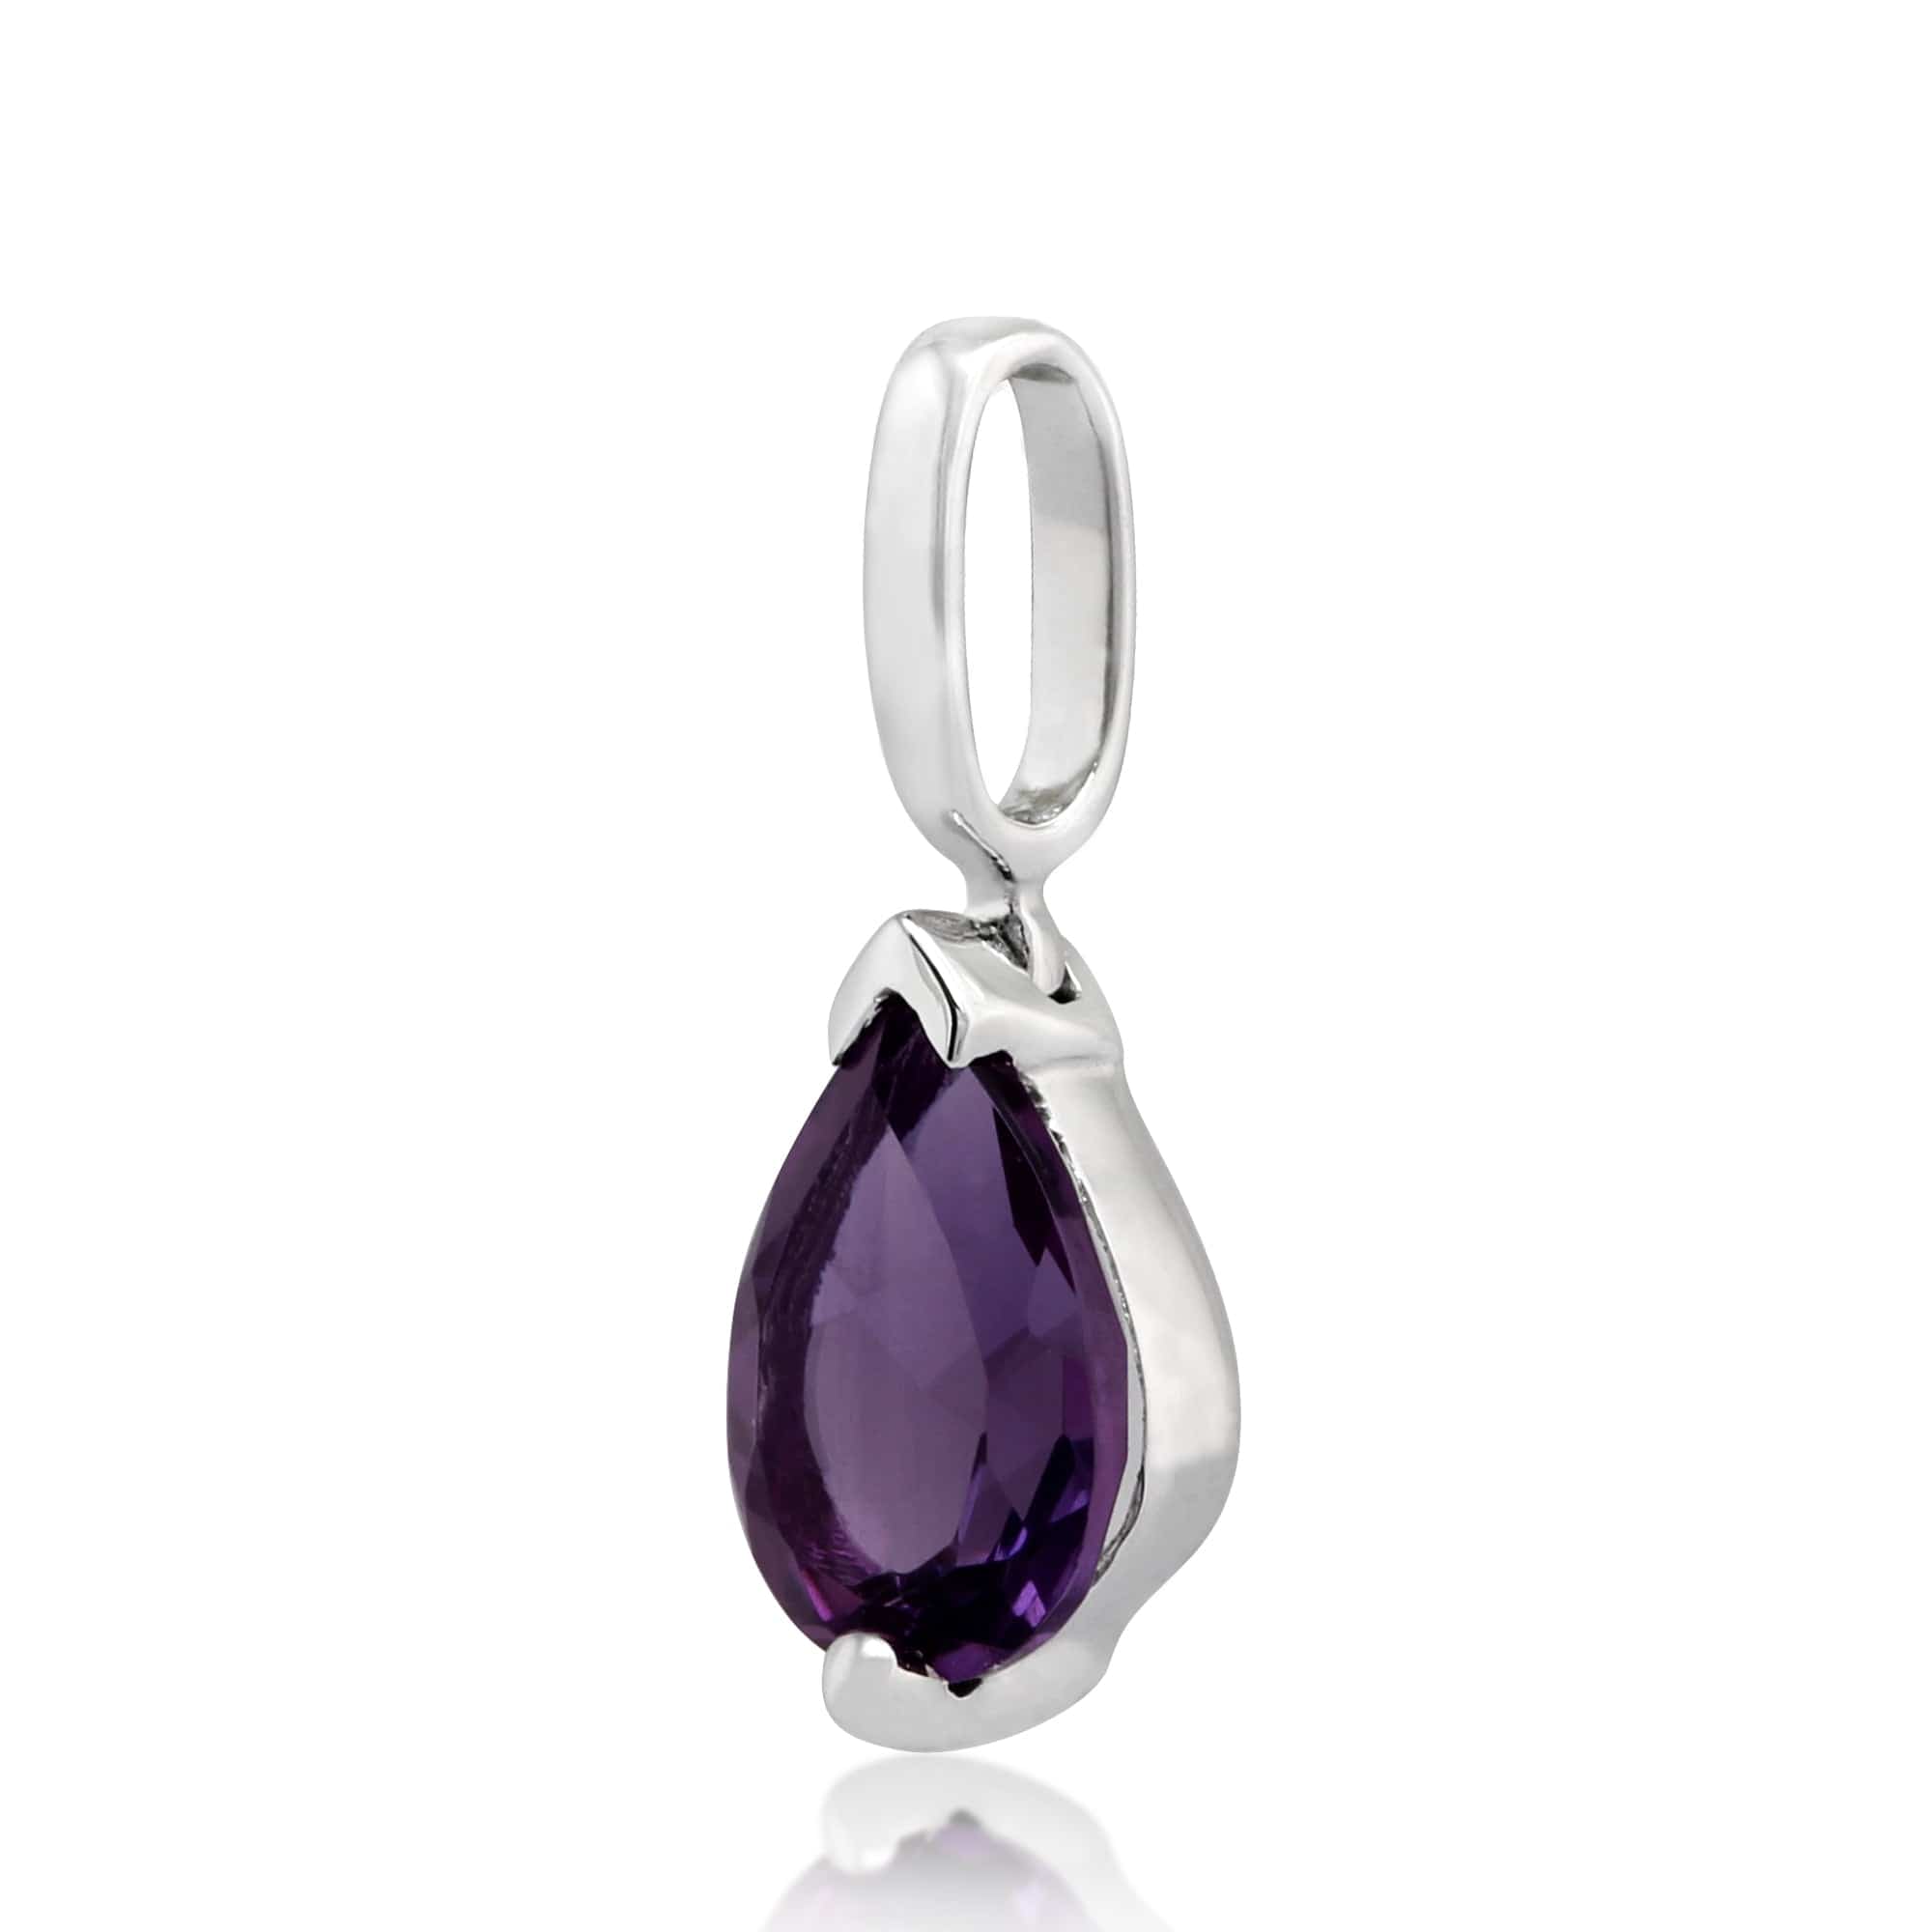 25661 Classic Pear Amethyst Pendant in 9ct White Gold 2